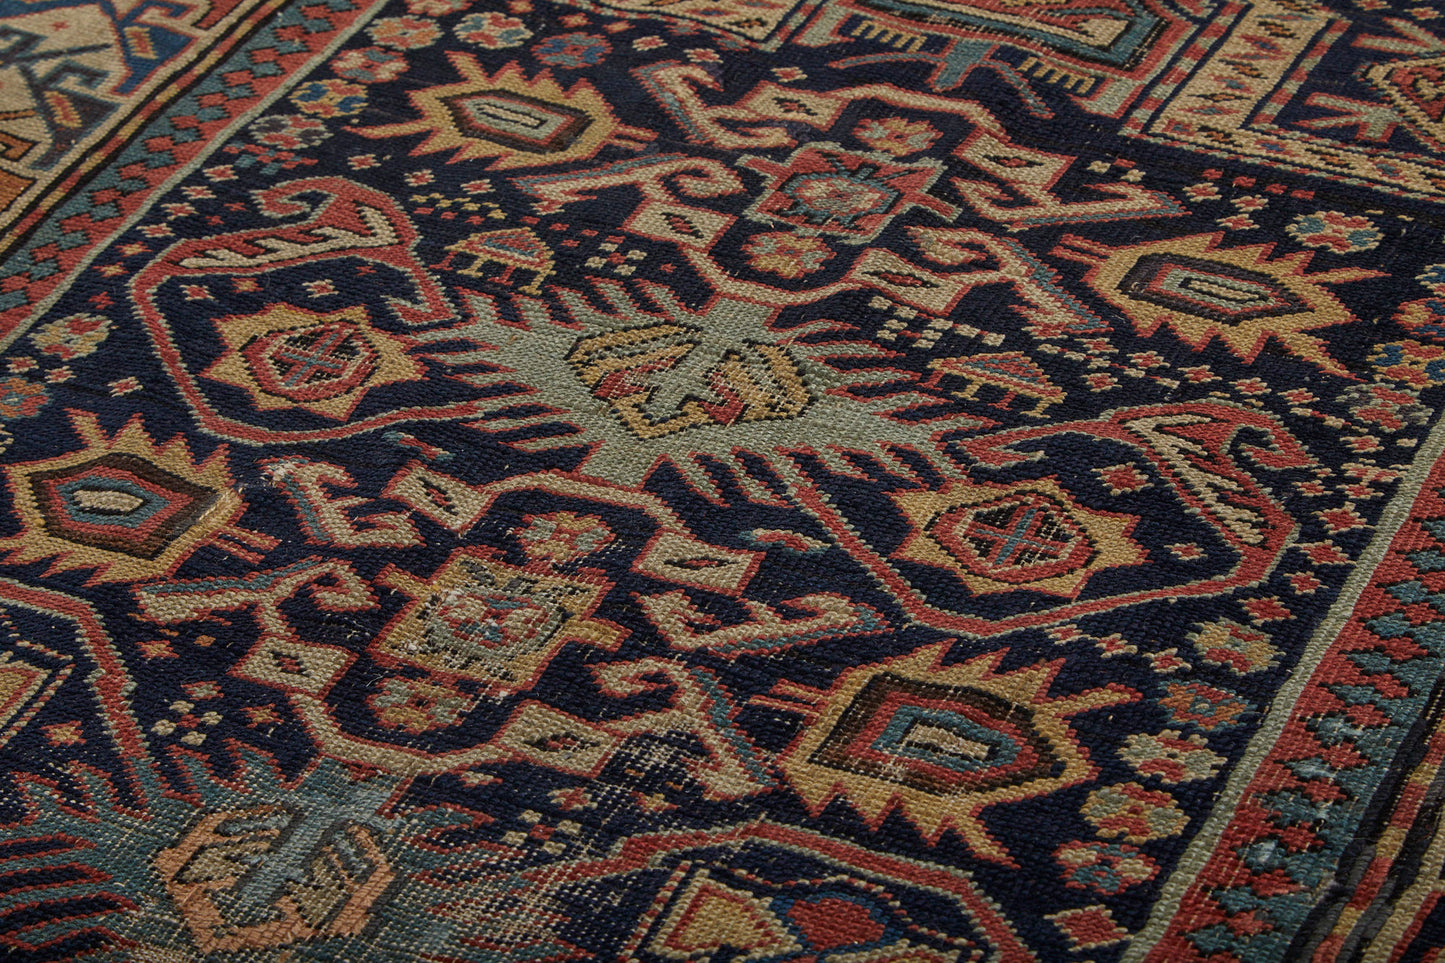 Antique Shirvan Prayer Persian rug intricately hand woven with beige base, dark blue center and yellow, pink and pale blue designs throughout with some repairs - Available from King Kennedy Rugs Los Angeles